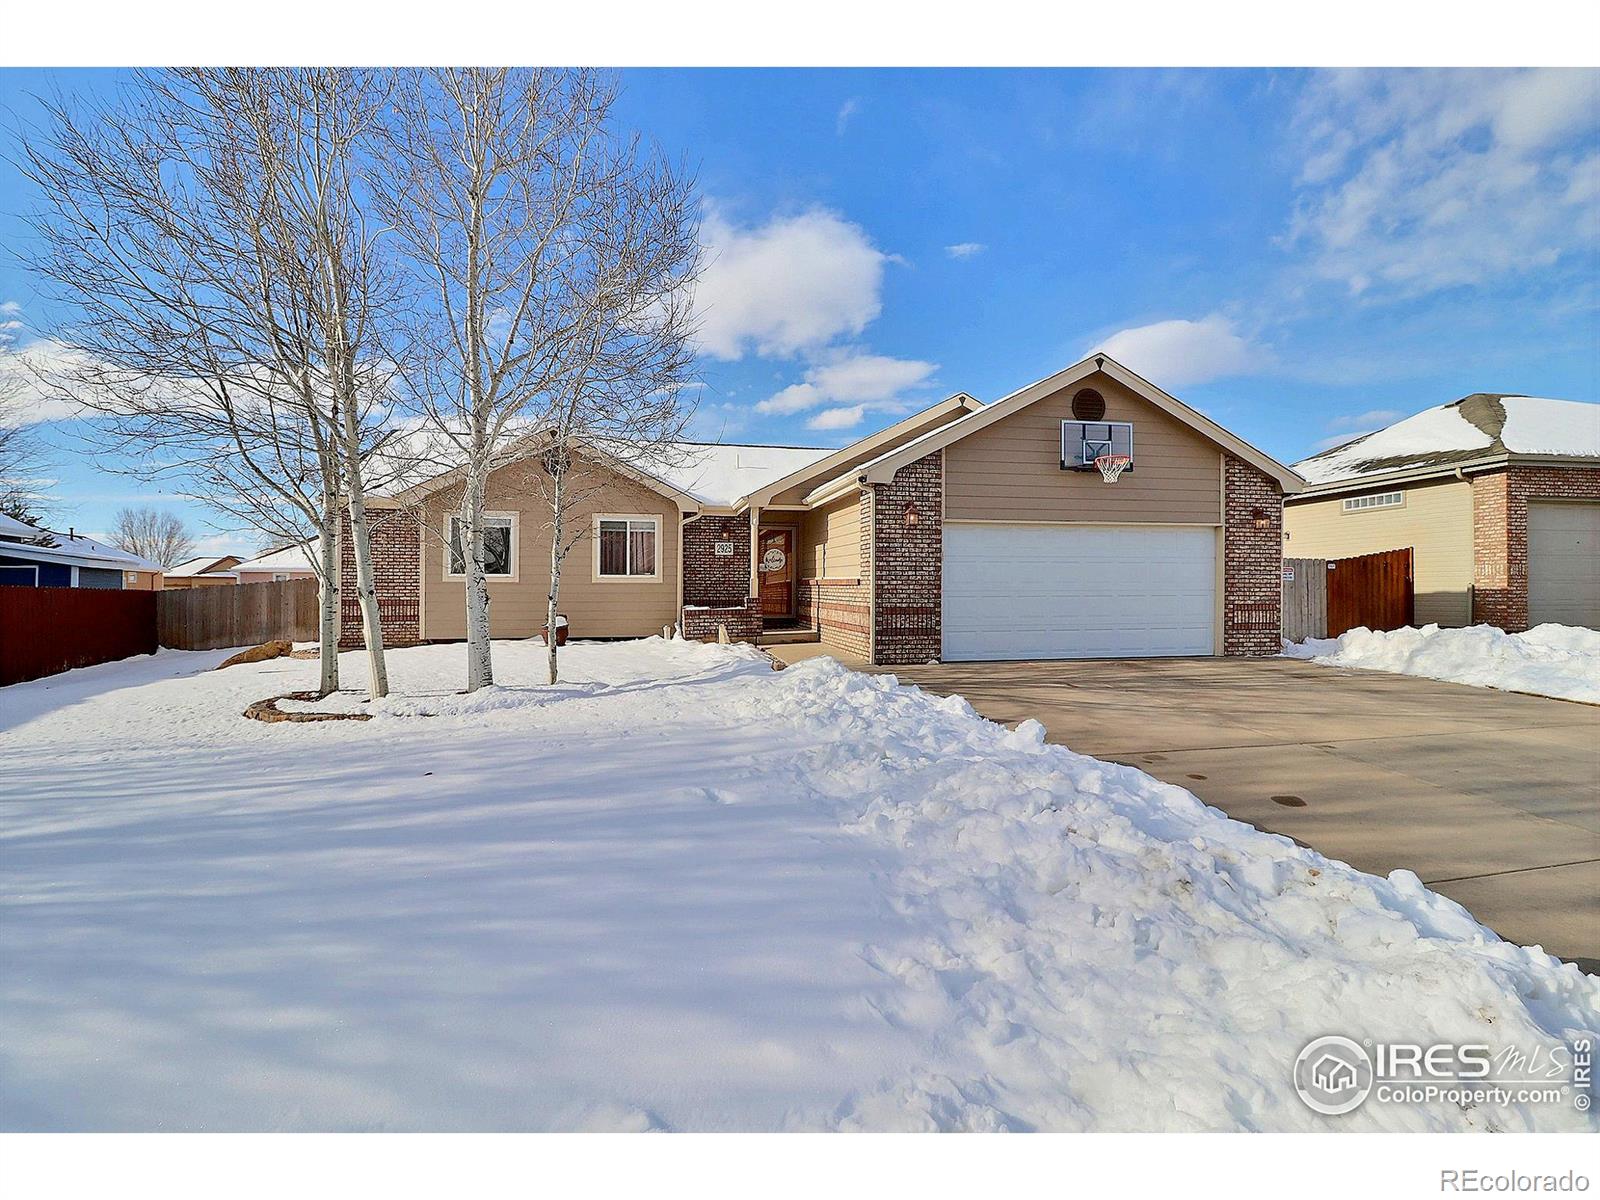 2925  58th Avenue, greeley MLS: 4567891003245 Beds: 5 Baths: 3 Price: $499,000